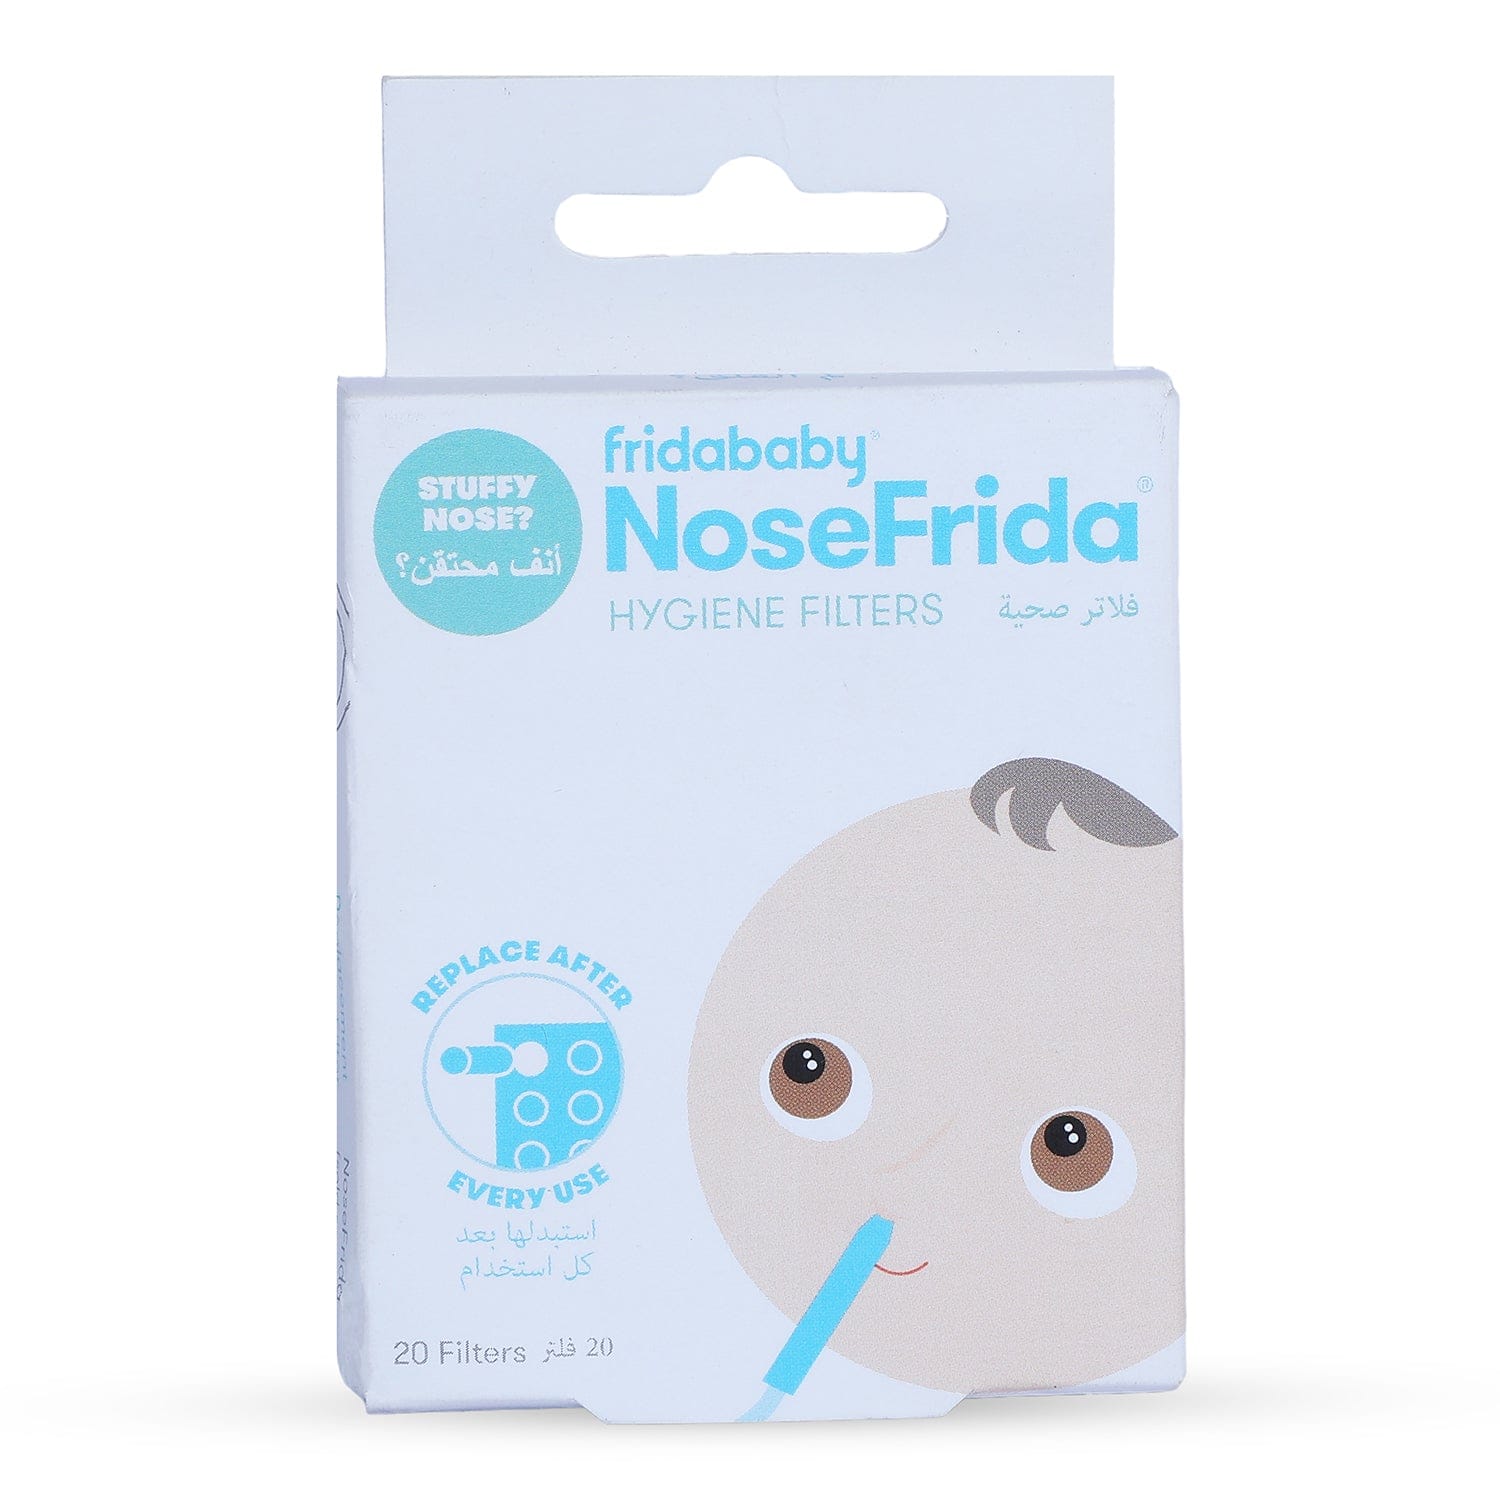 Fridababy Nosefrida Replacement Hygiene Filters - 20 Filters 